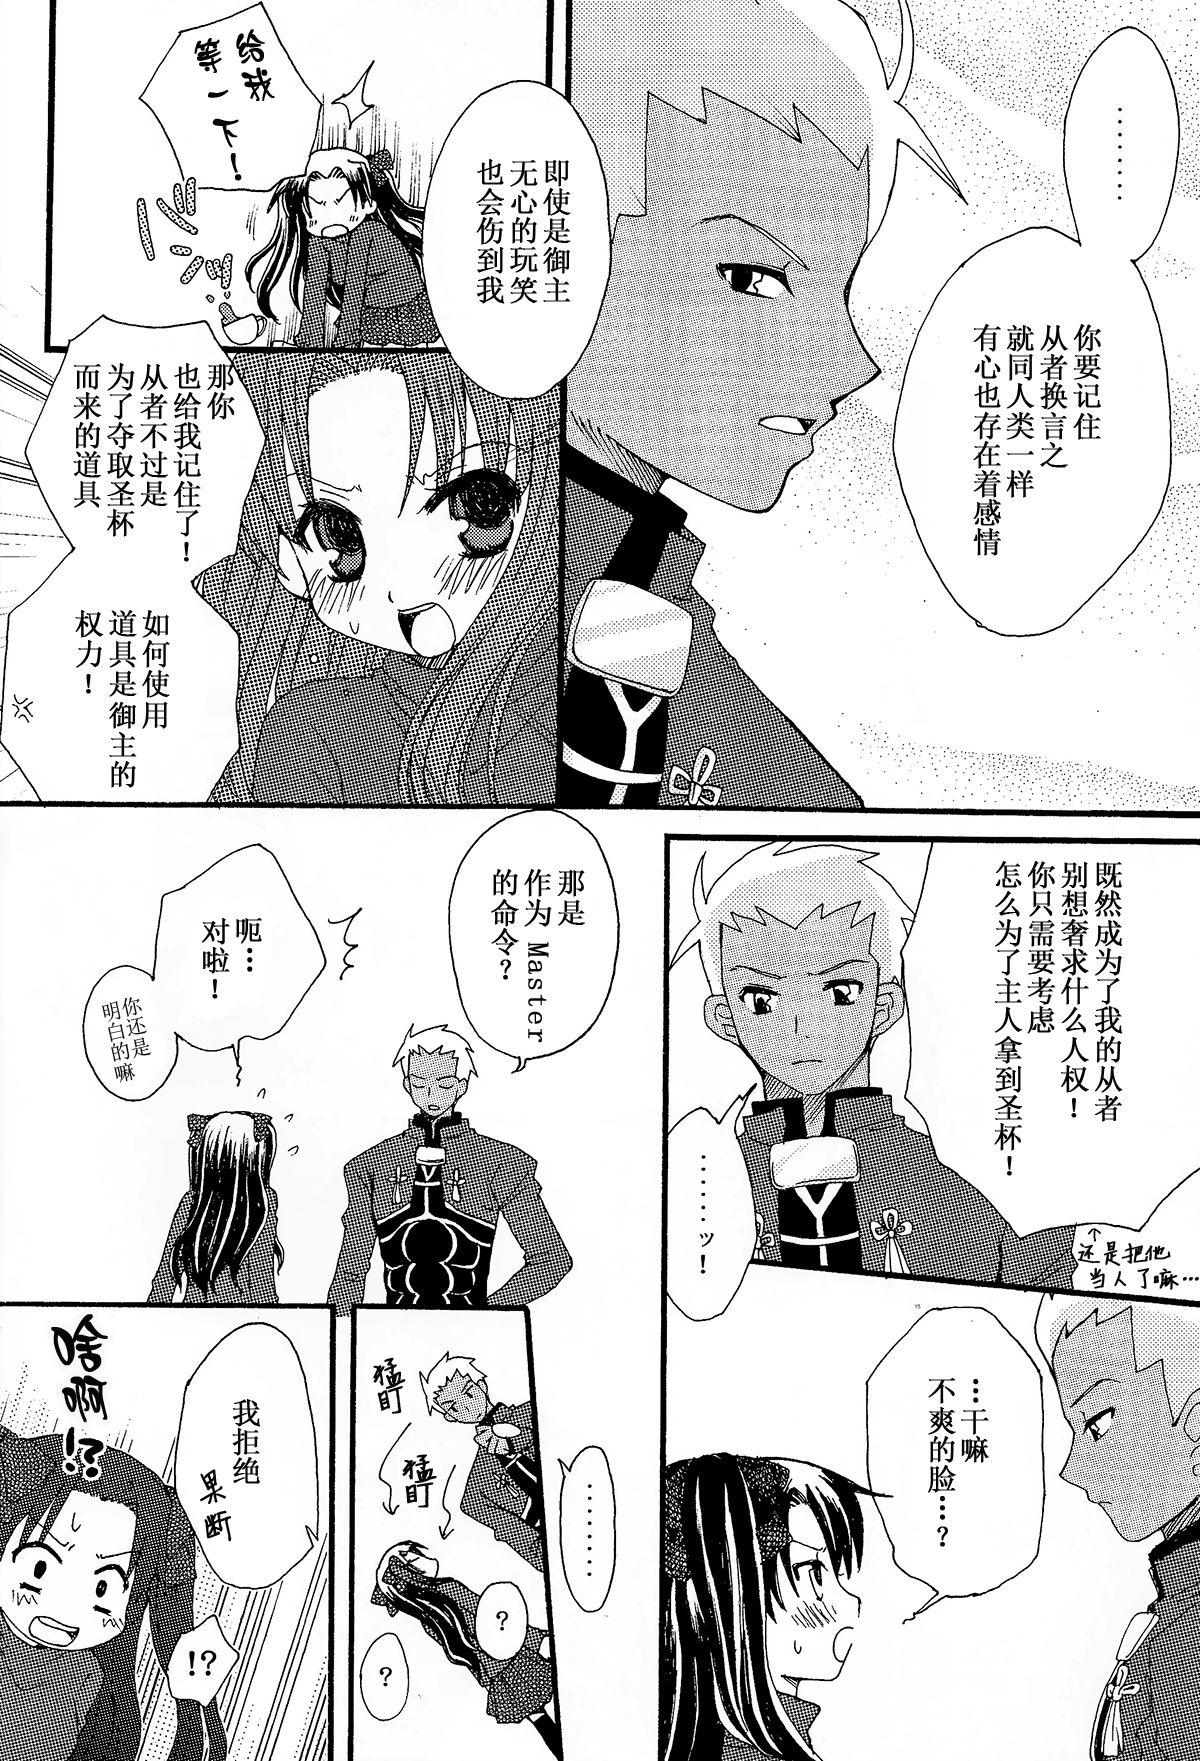 Petite Teen Kanojo to Aiken - Fate stay night Female - Page 5